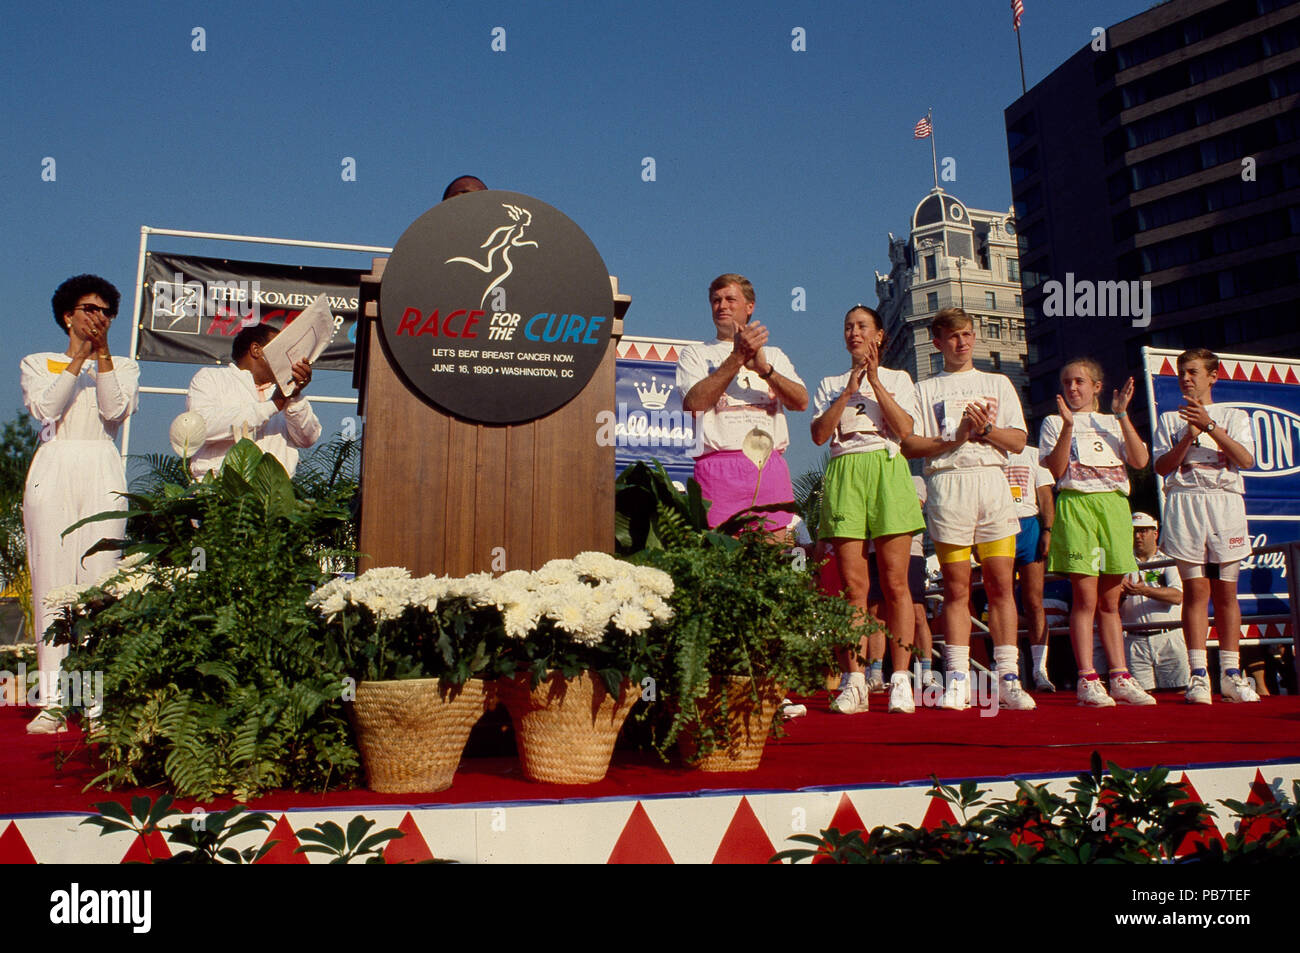 1804 Vice President Dan Quayle and Second Lady Marilyn Quayle, to the right of the podium, at a Race for the (Cancer) Cure run in 1990, Washington, D.C LCCN2011632620 Stock Photo